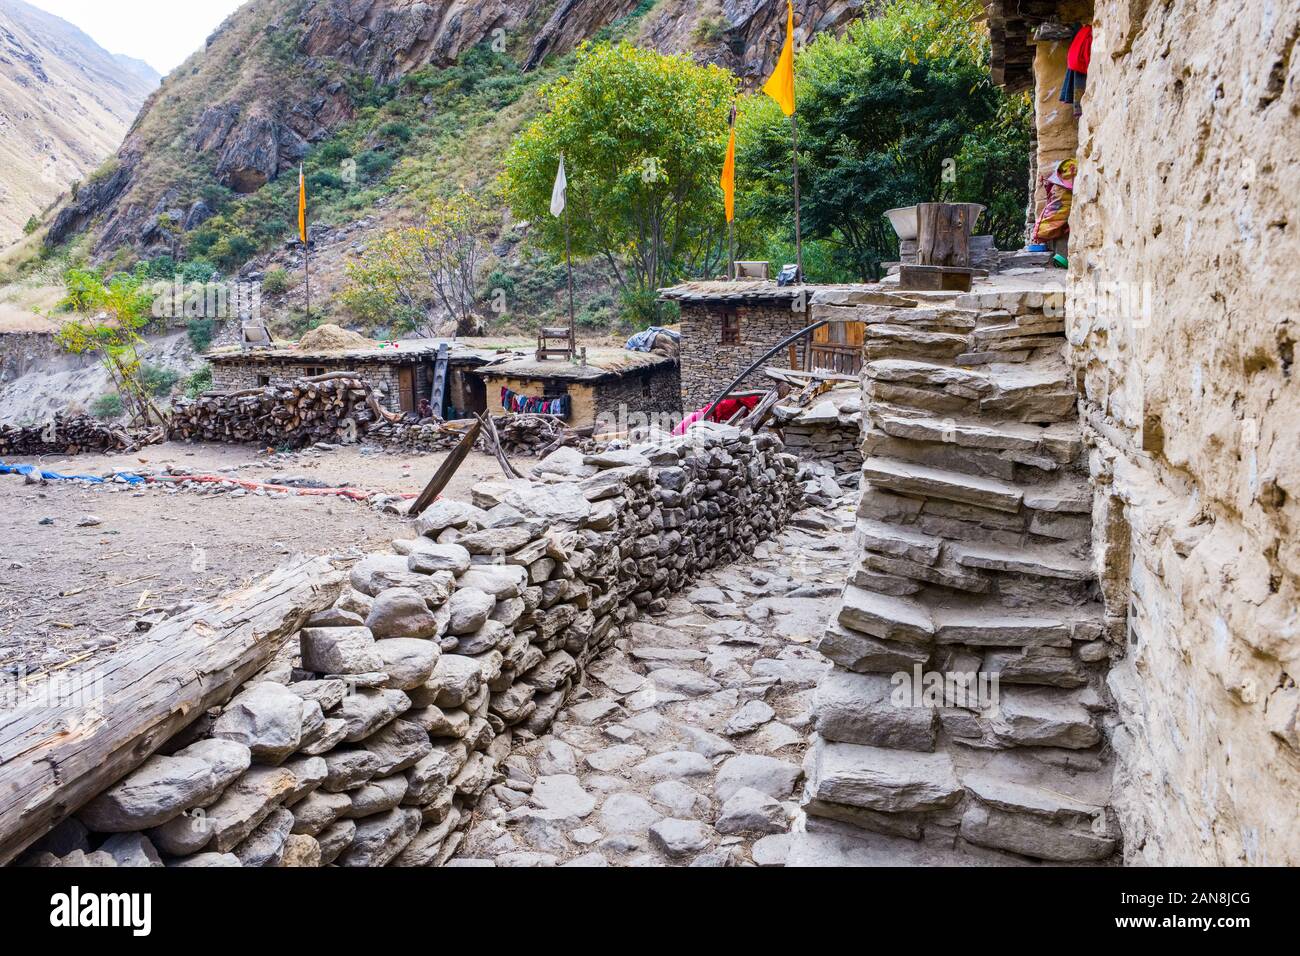 traditional stone built houses in an ethnically Tibetan village in Dolpo, Nepal Stock Photo